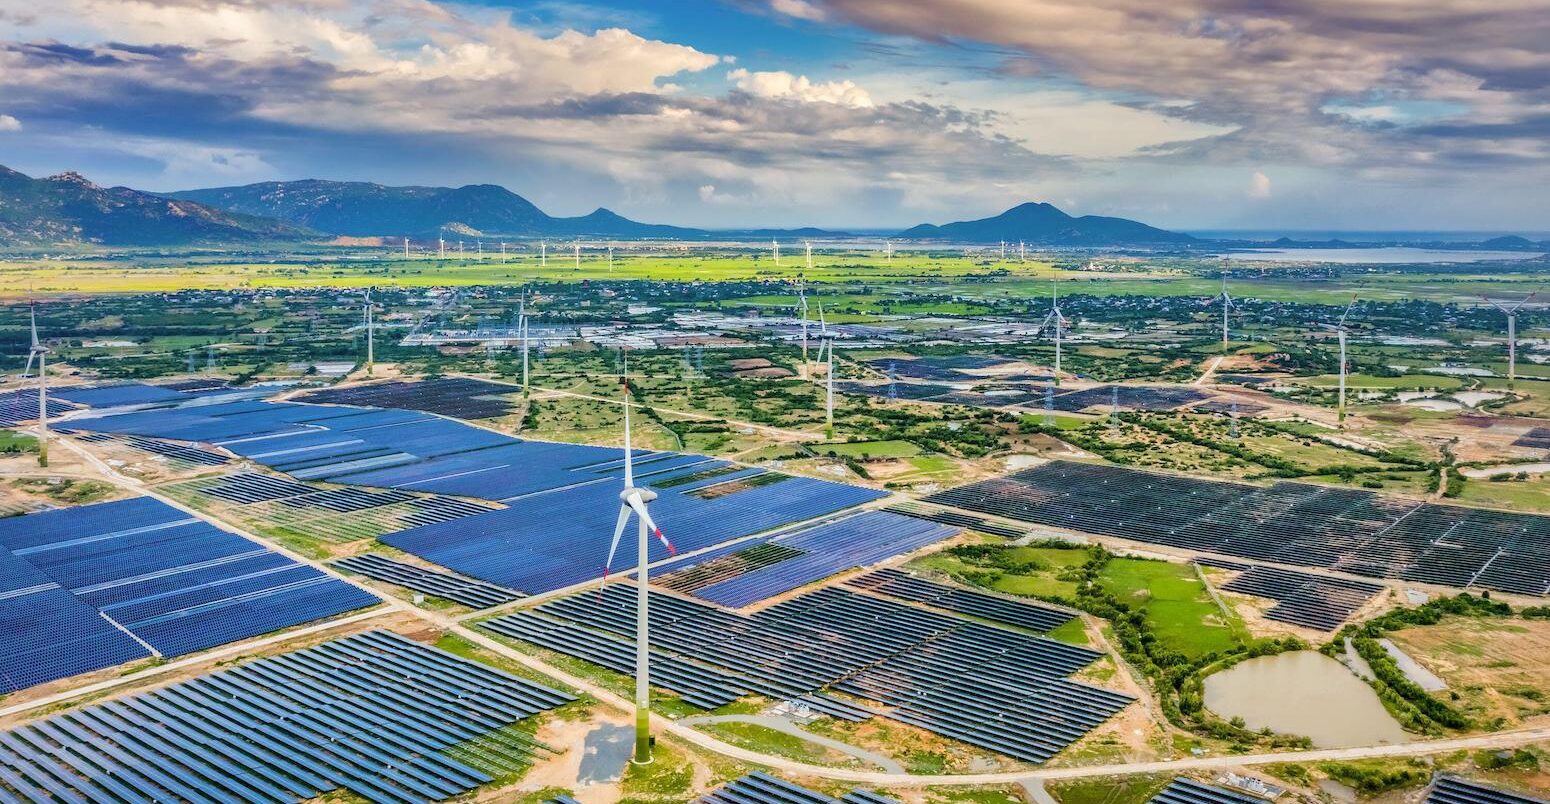 Aerial view of solar panels and wind turbines in Vietnam. Credit: Quang Ngoc Nguyen / Alamy Stock Photo